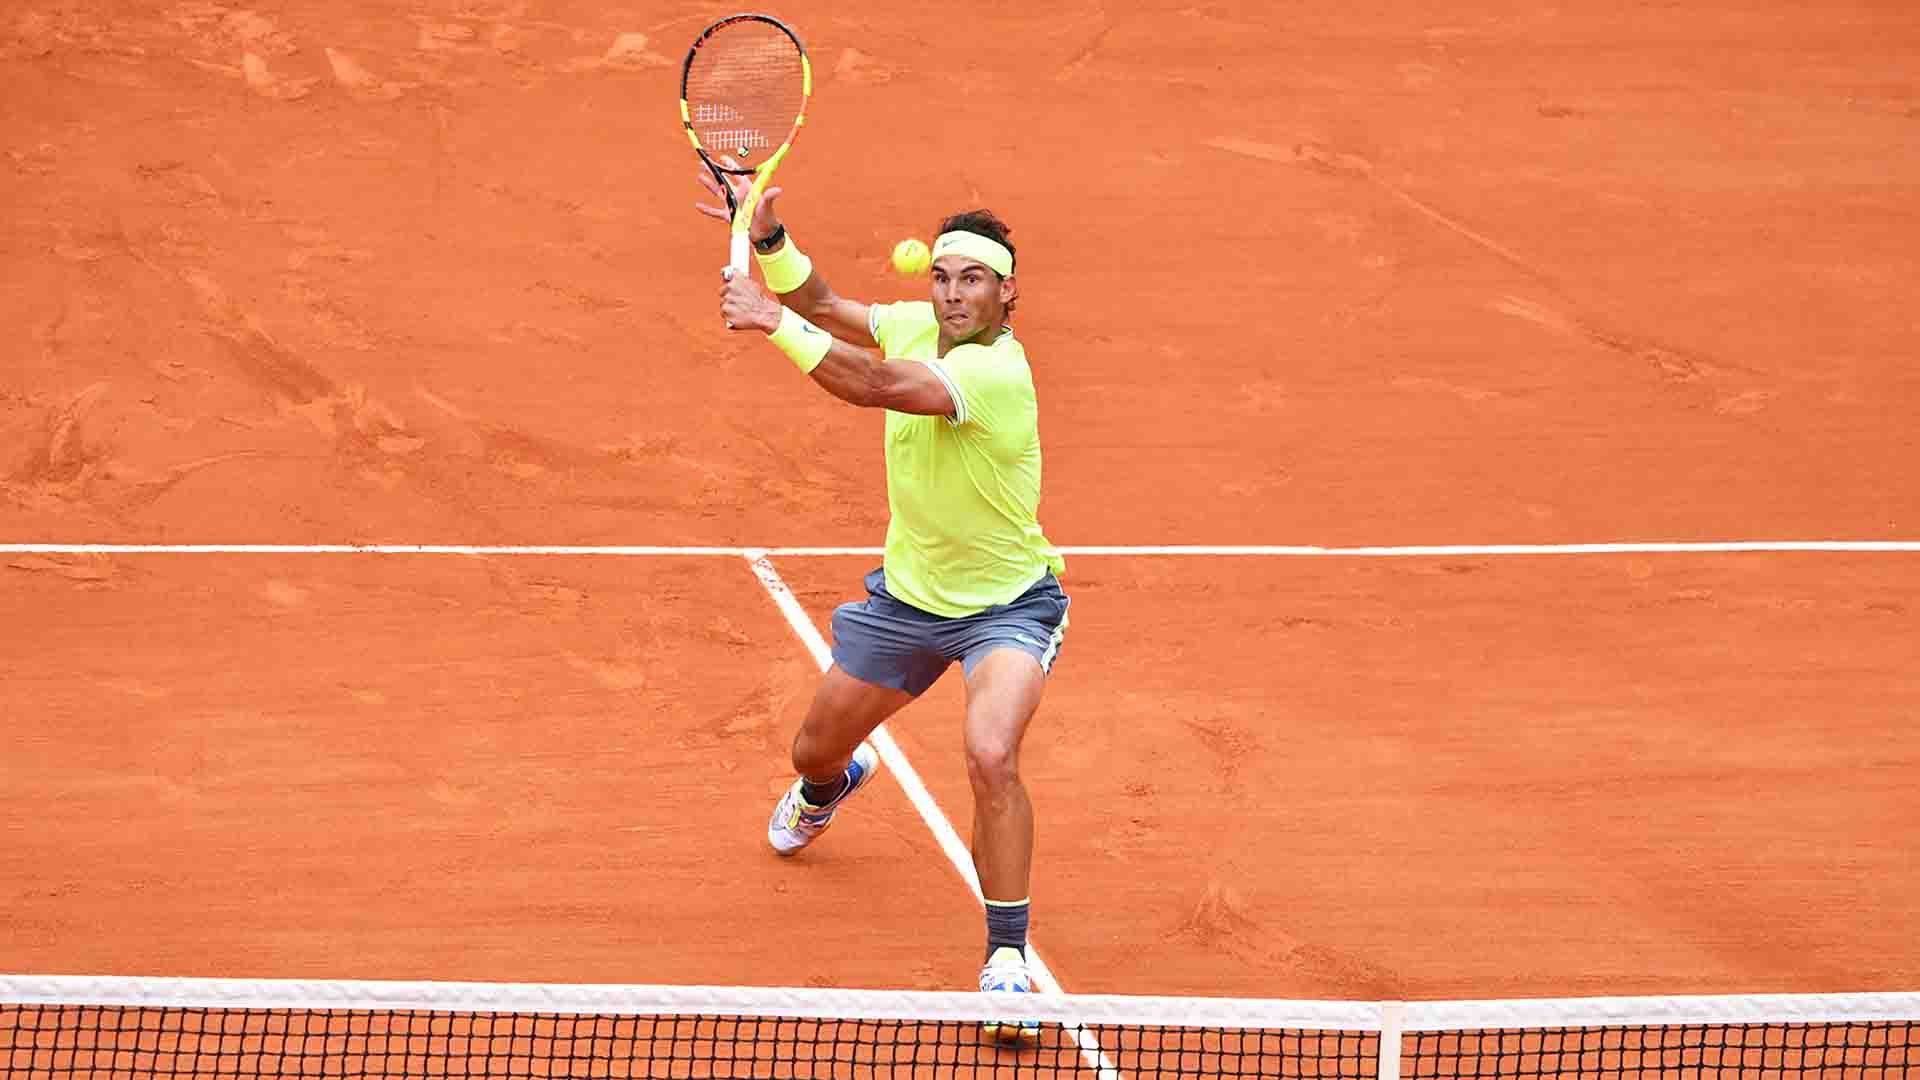 Rafael Nadal beats Dominic Thiem 6-3, 5-7, 6-1, 6-1 in the 2019 Roland Garros final to become the first player to win a tour-level event on 12 occasions.